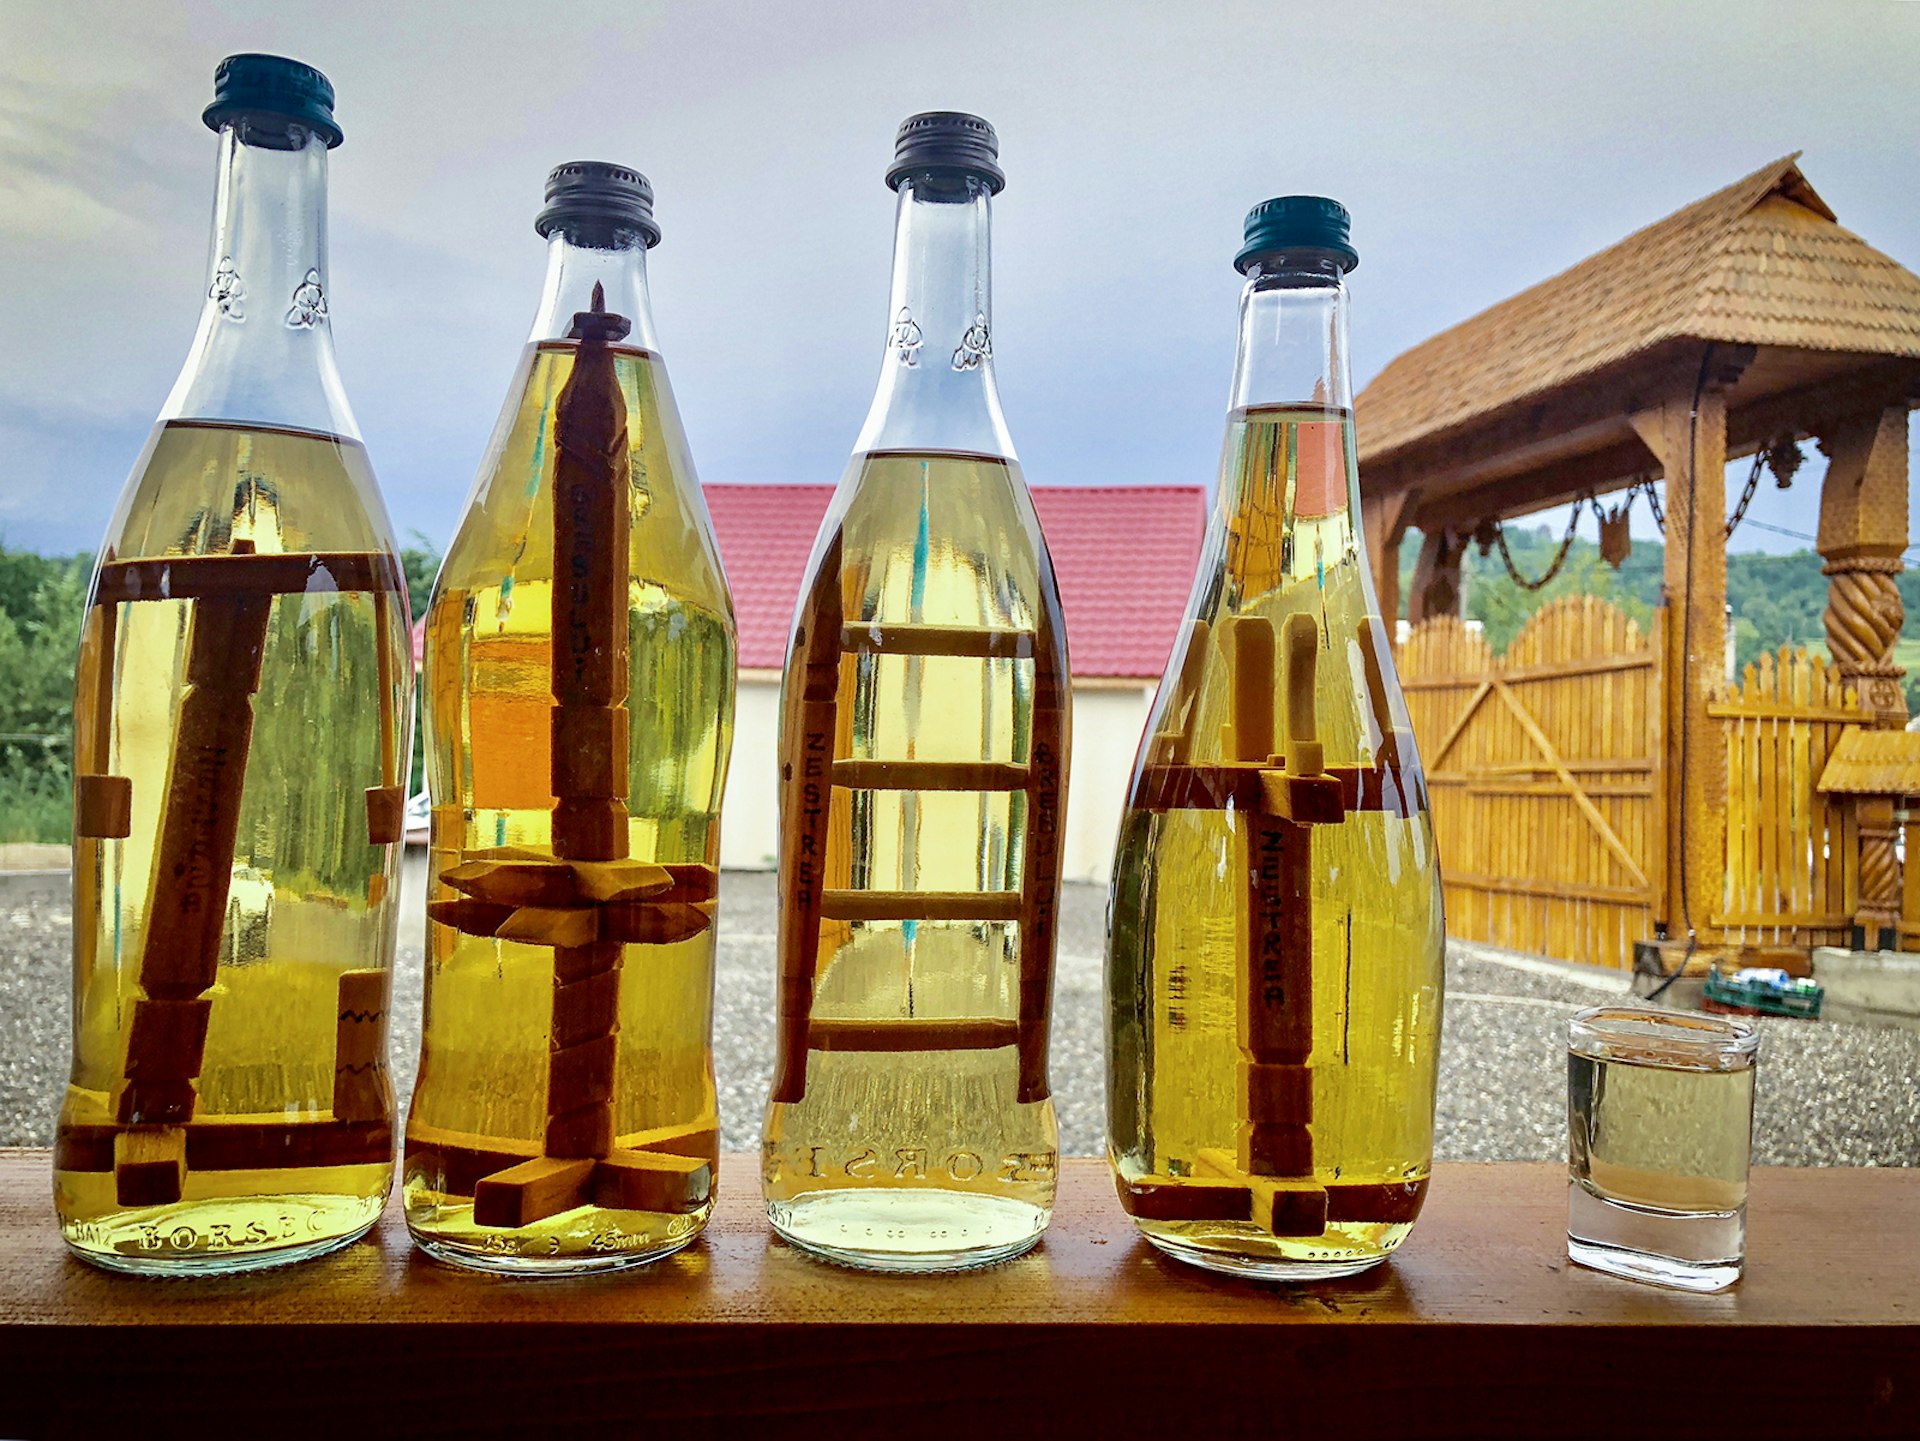 Three bottles of yellow liquor sit on a table next to a tasting glass with a barn in the background. Transylvania, Romania.